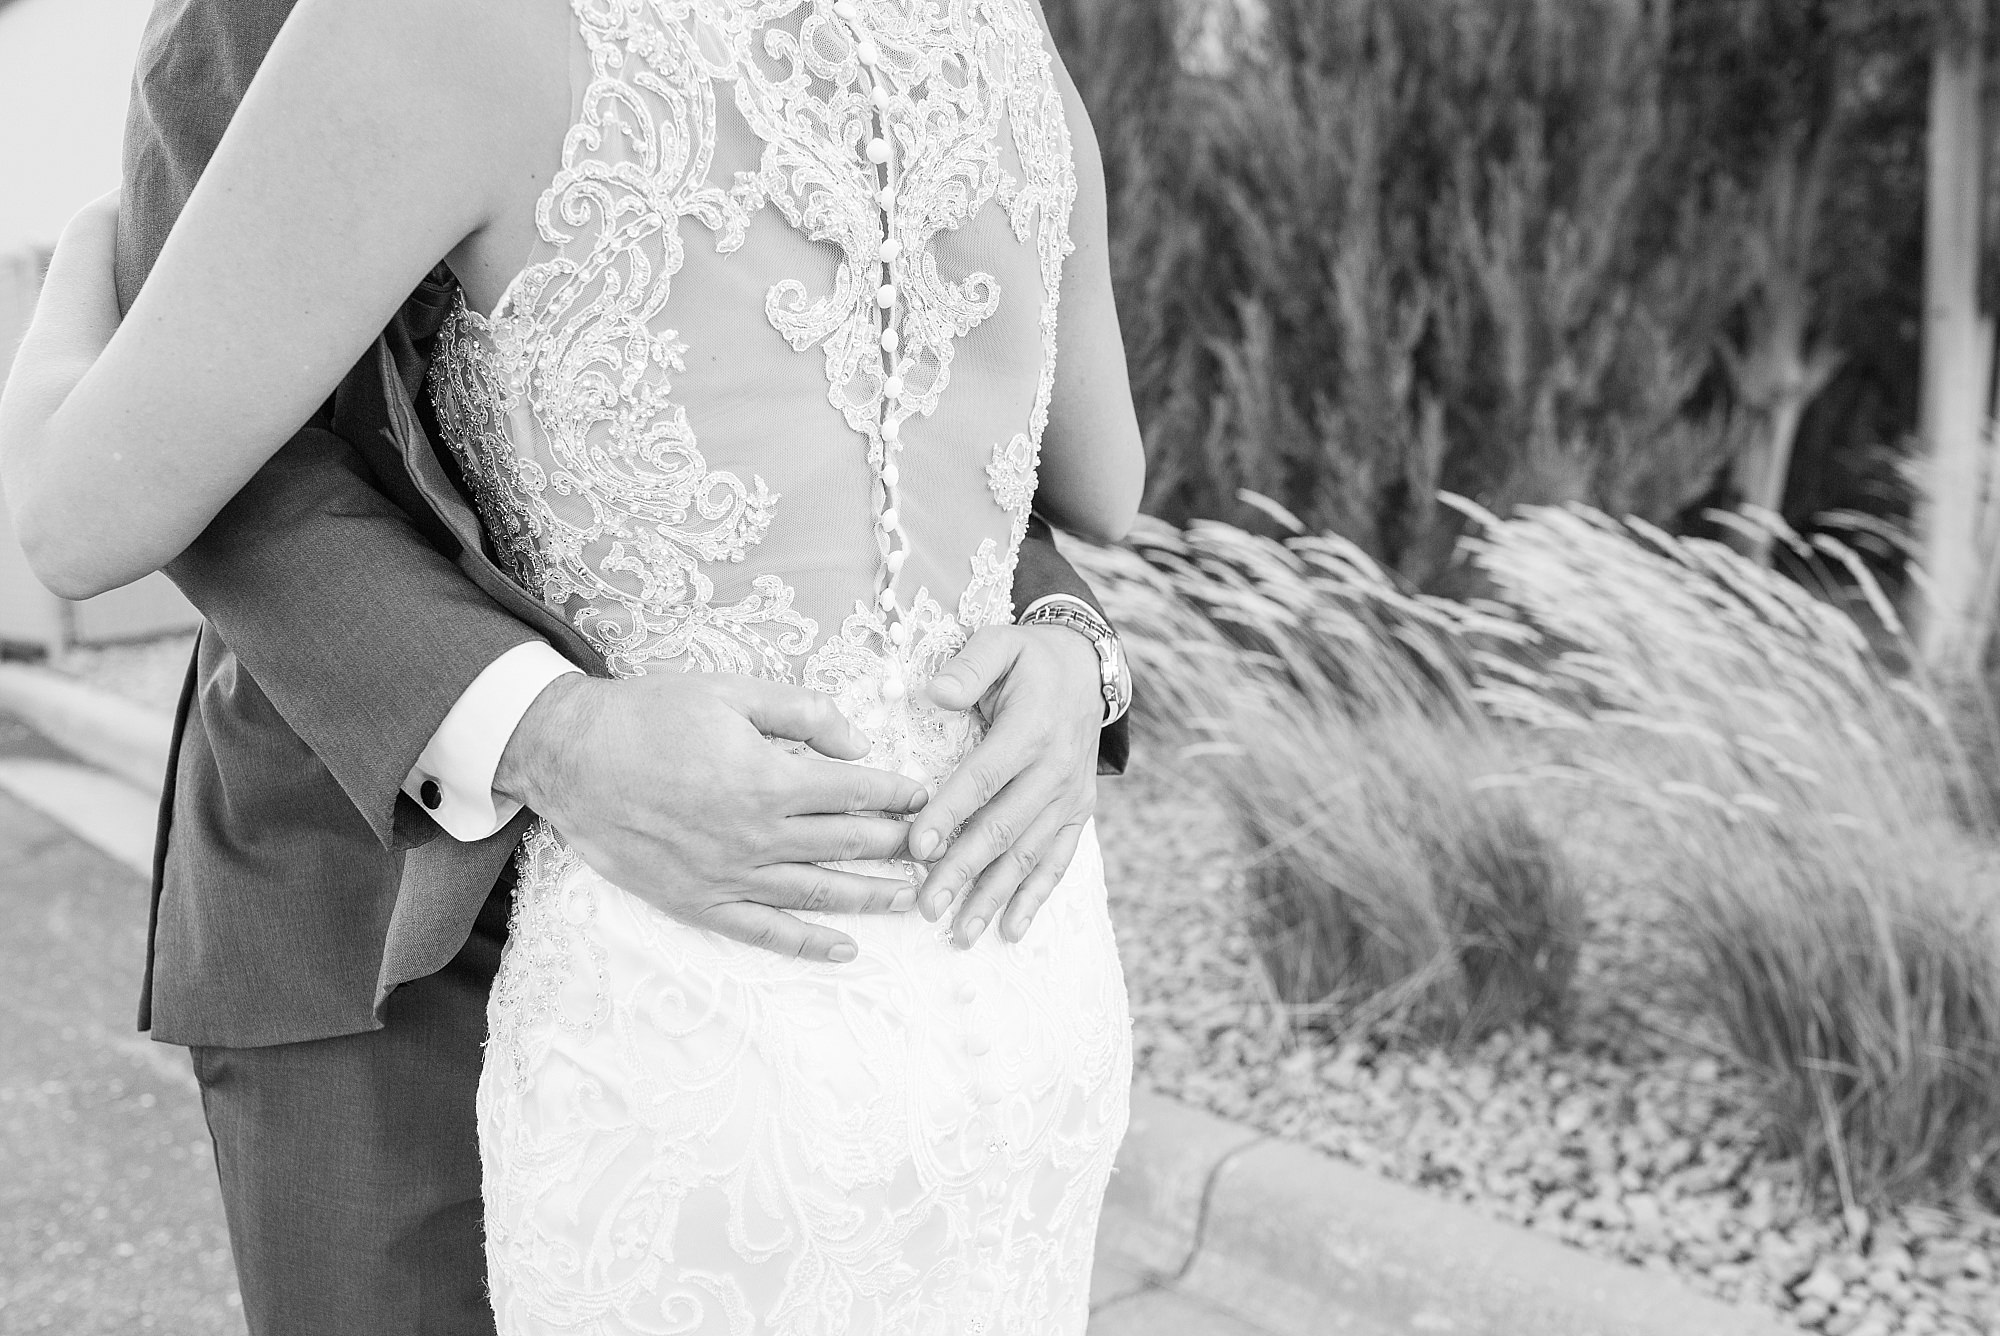 A groom's hands rest on his bride's back during their first look in black and white